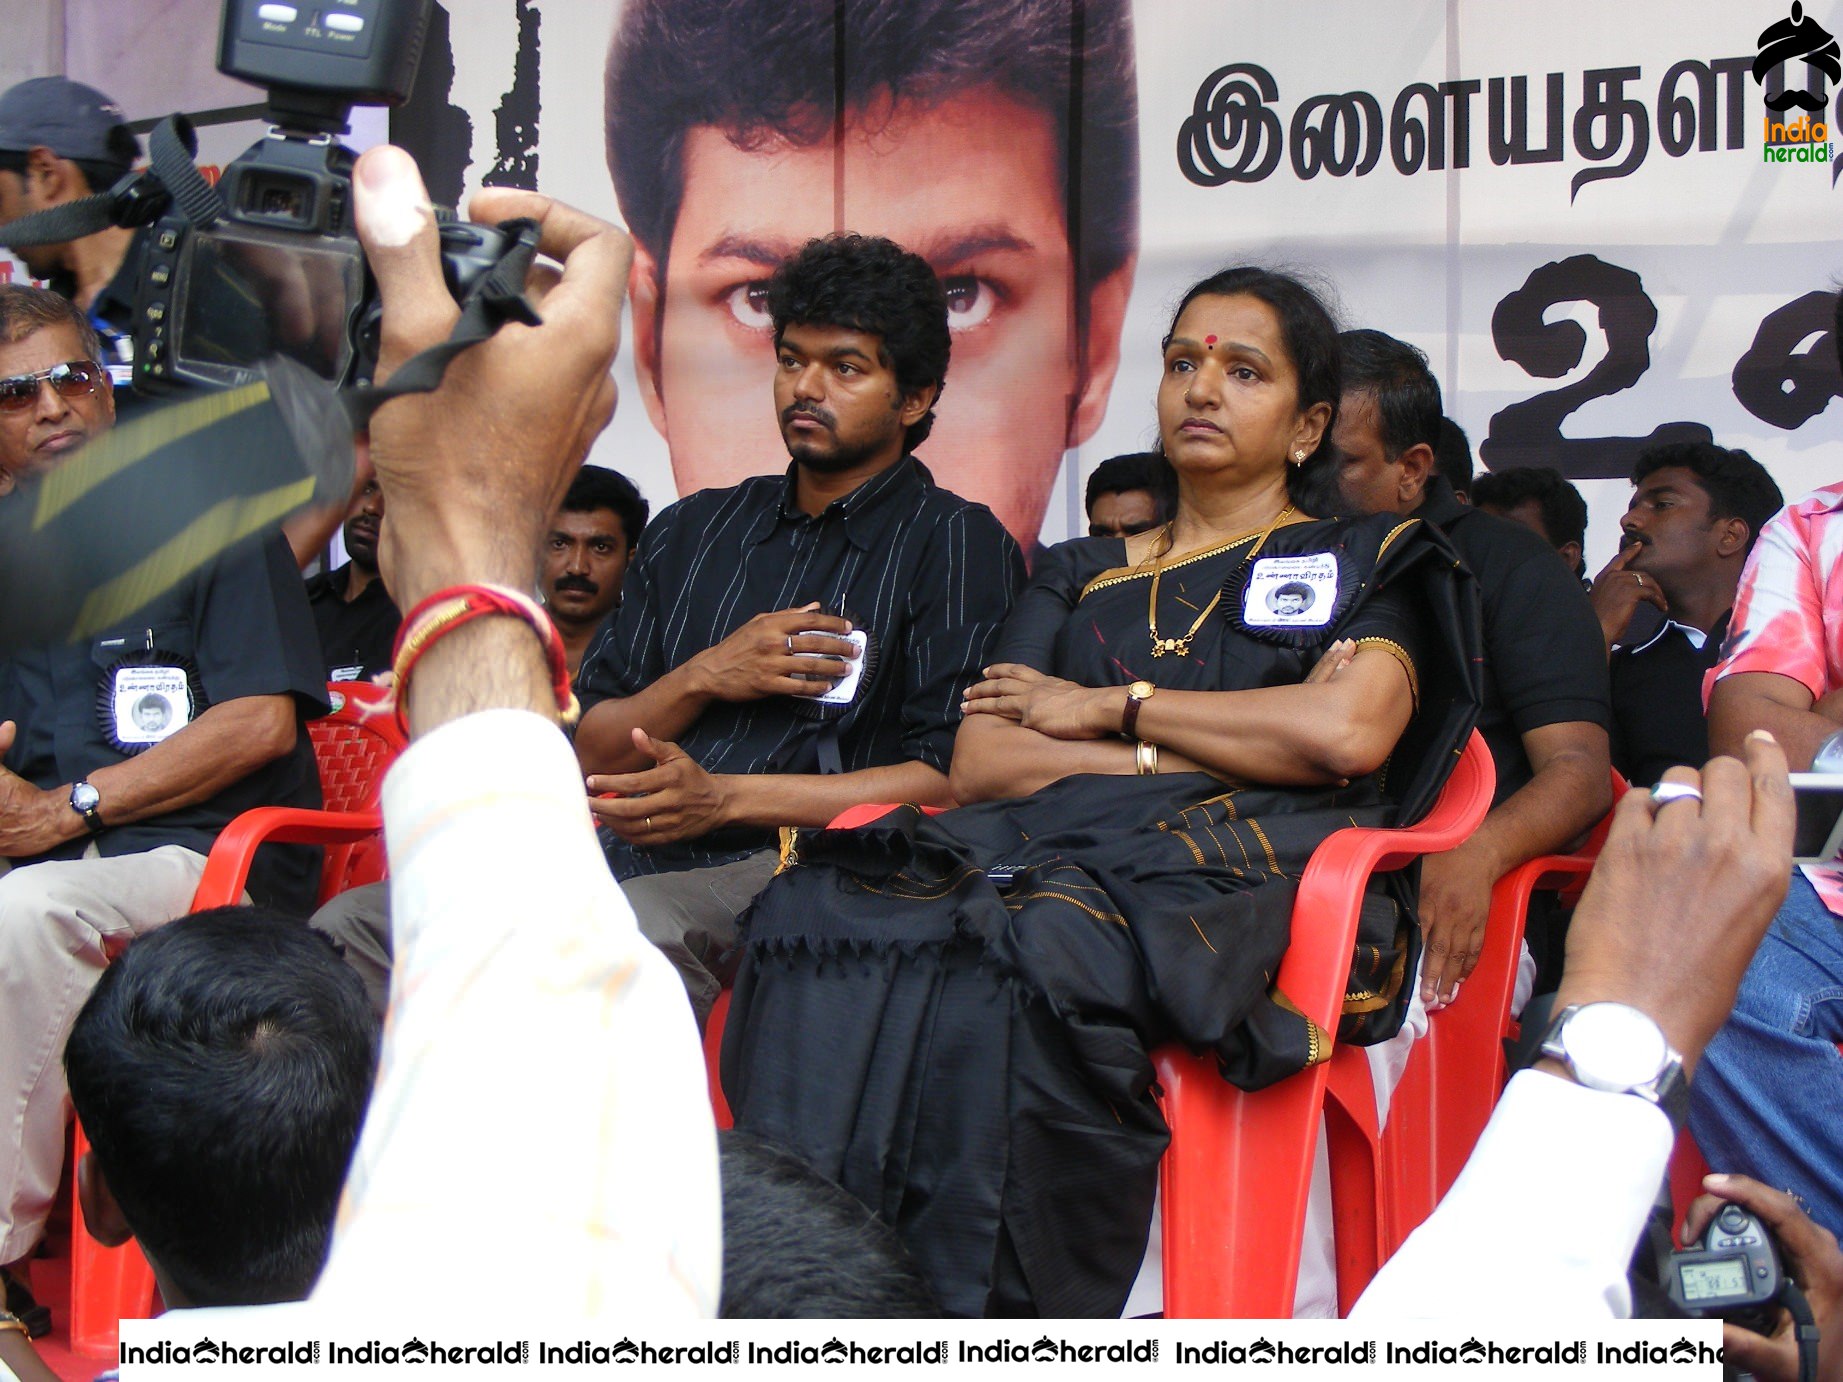 Actor Vijay with his wife while fasting for Eelam Tamils Set 1